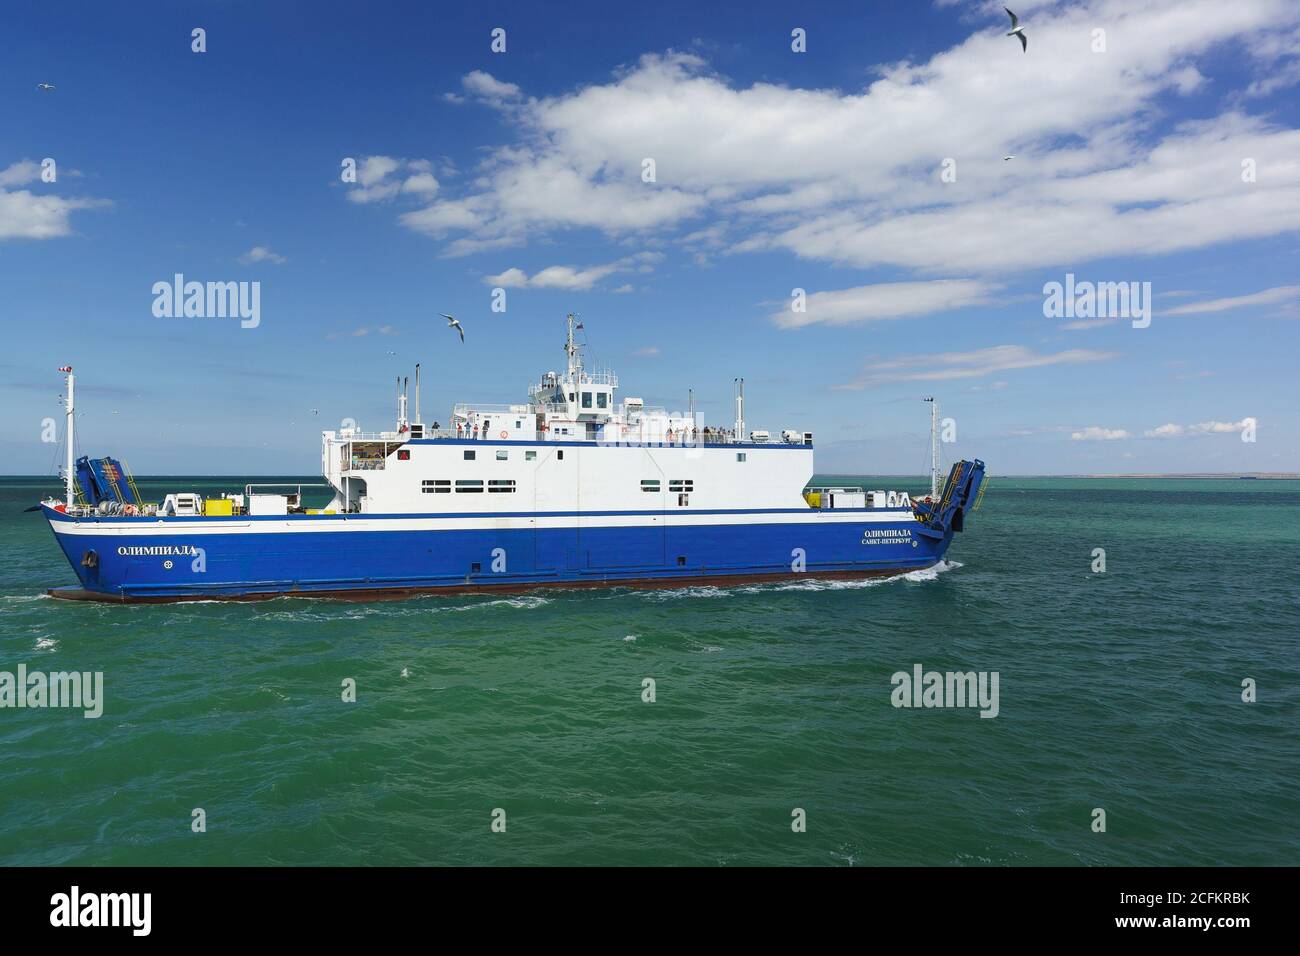 Russia, the Kerch Strait - Sep 02.2017: Ferry 'Olympics' - the second of which on July 16, 2014 at the crossing paromova S. Greek transportation Kerch Stock Photo